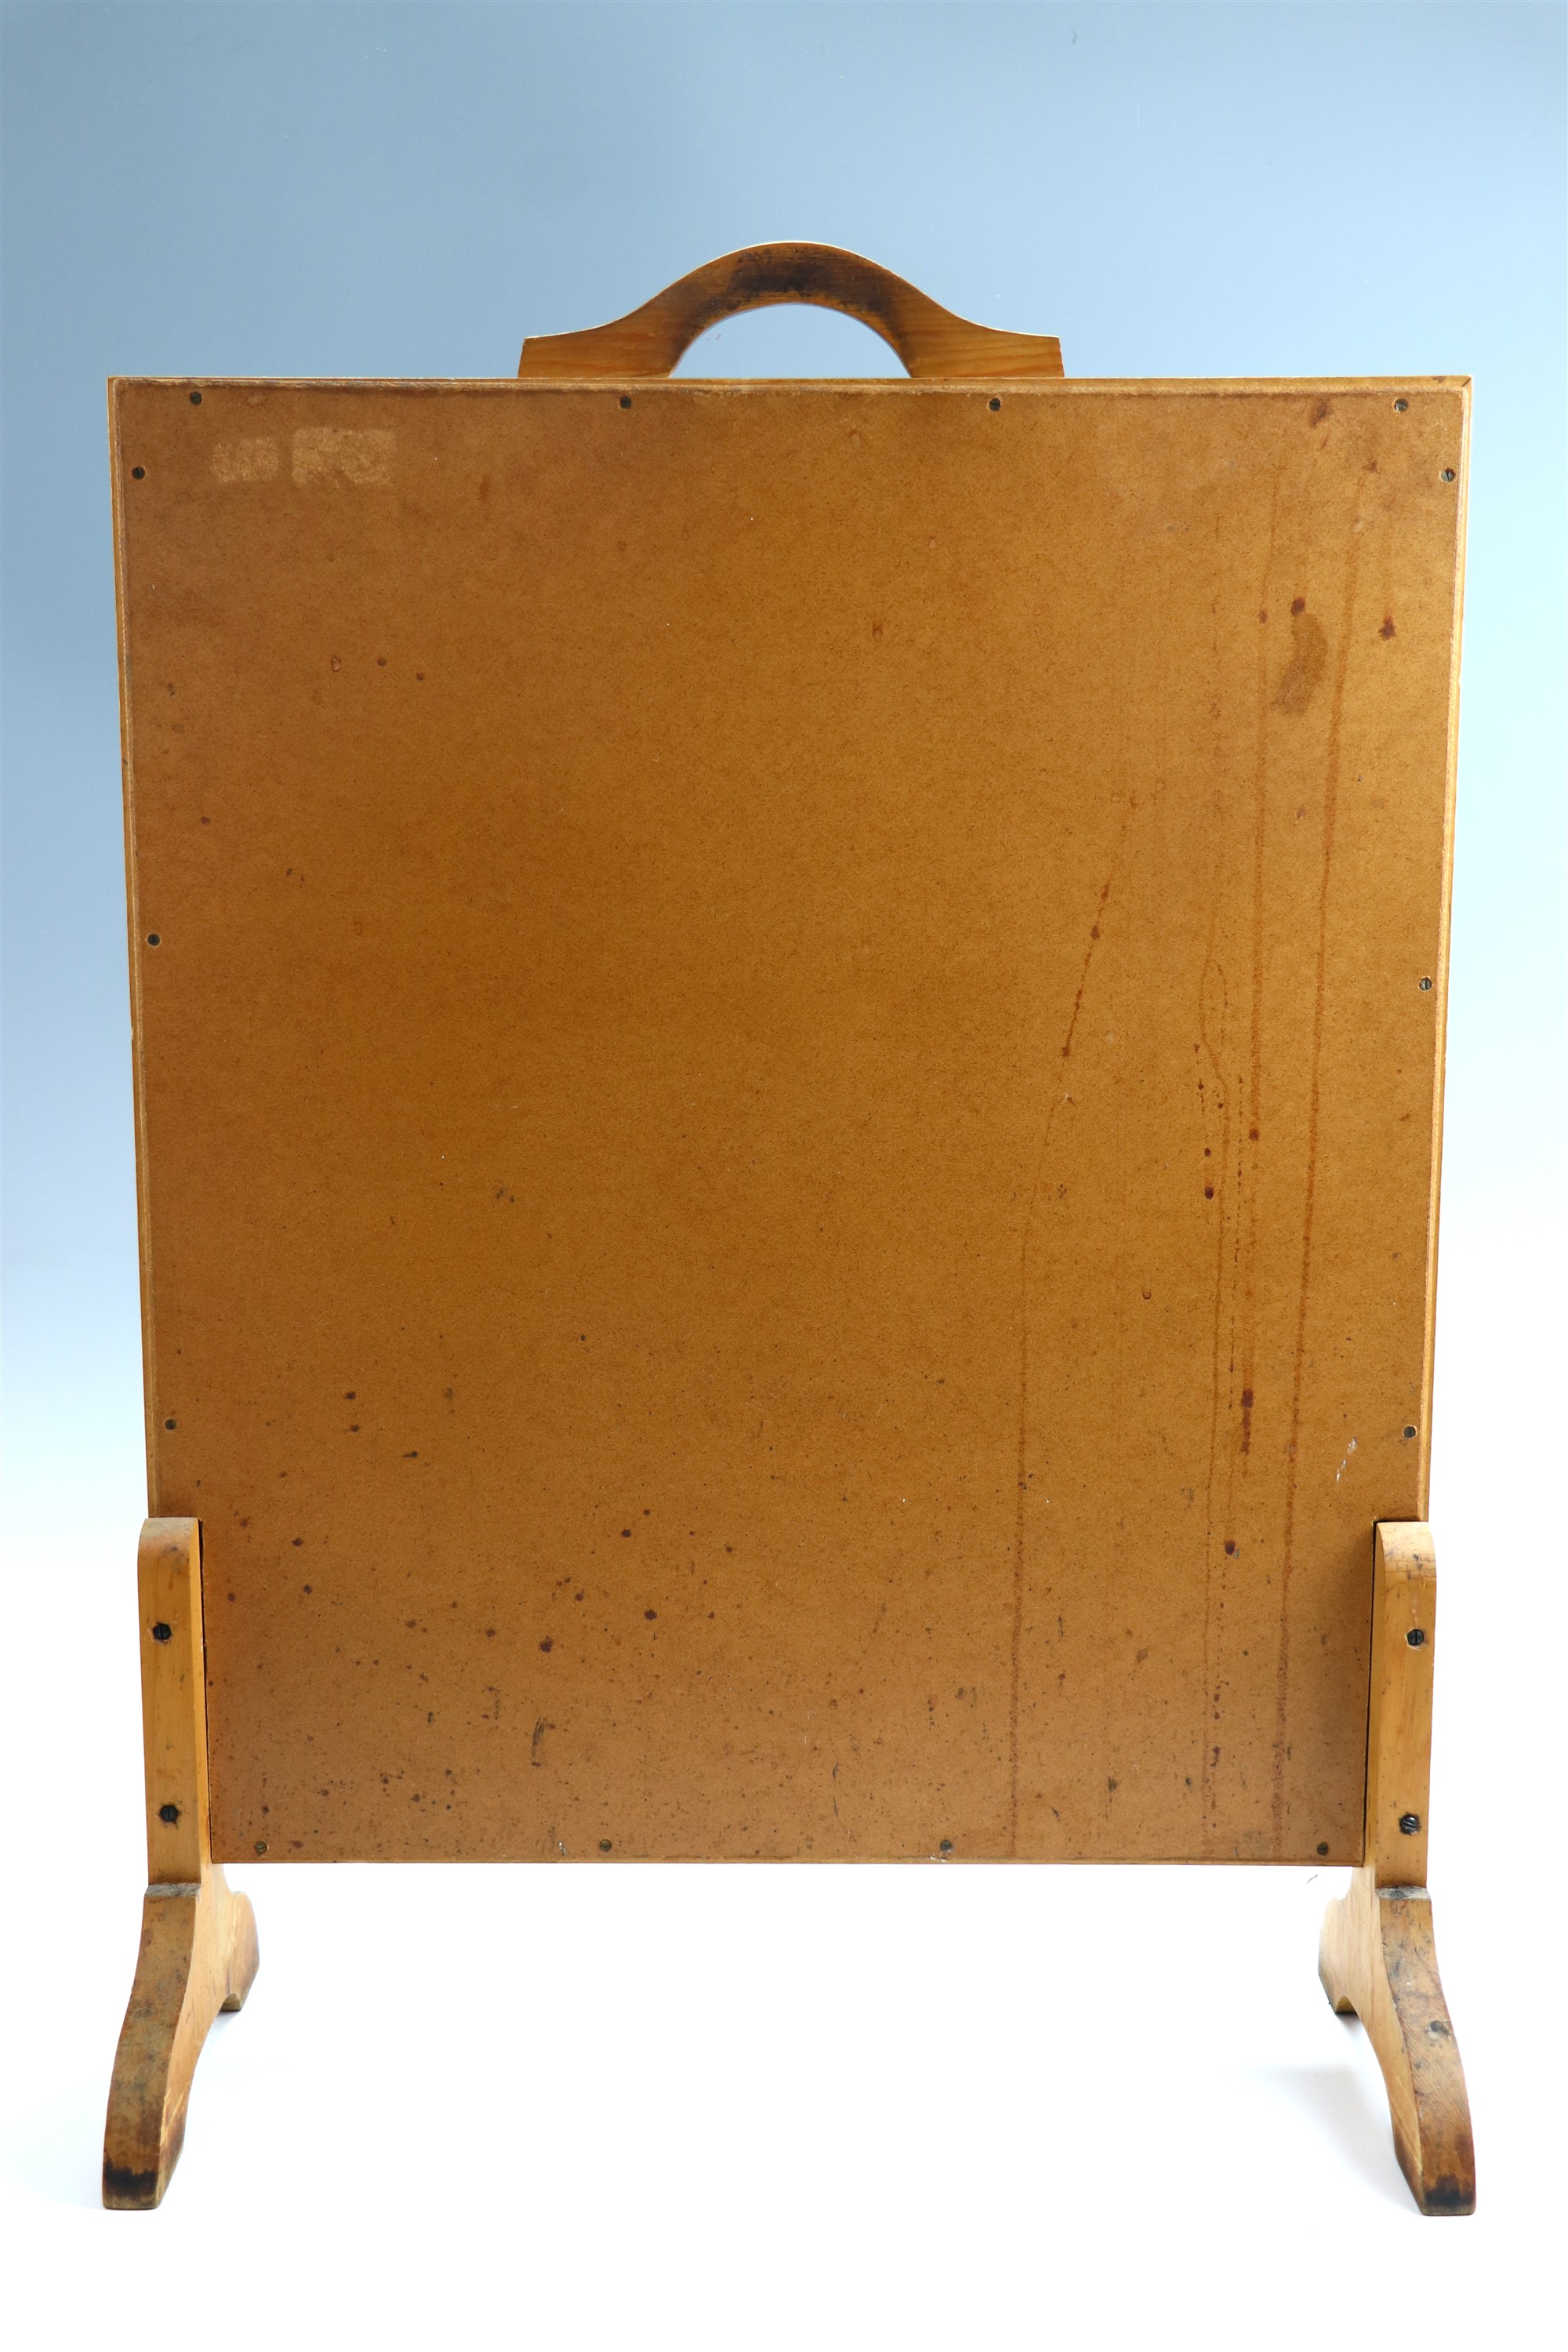 A 1950s embroidered fire screen, 50.5 x 21 x 72 cm - Image 3 of 3